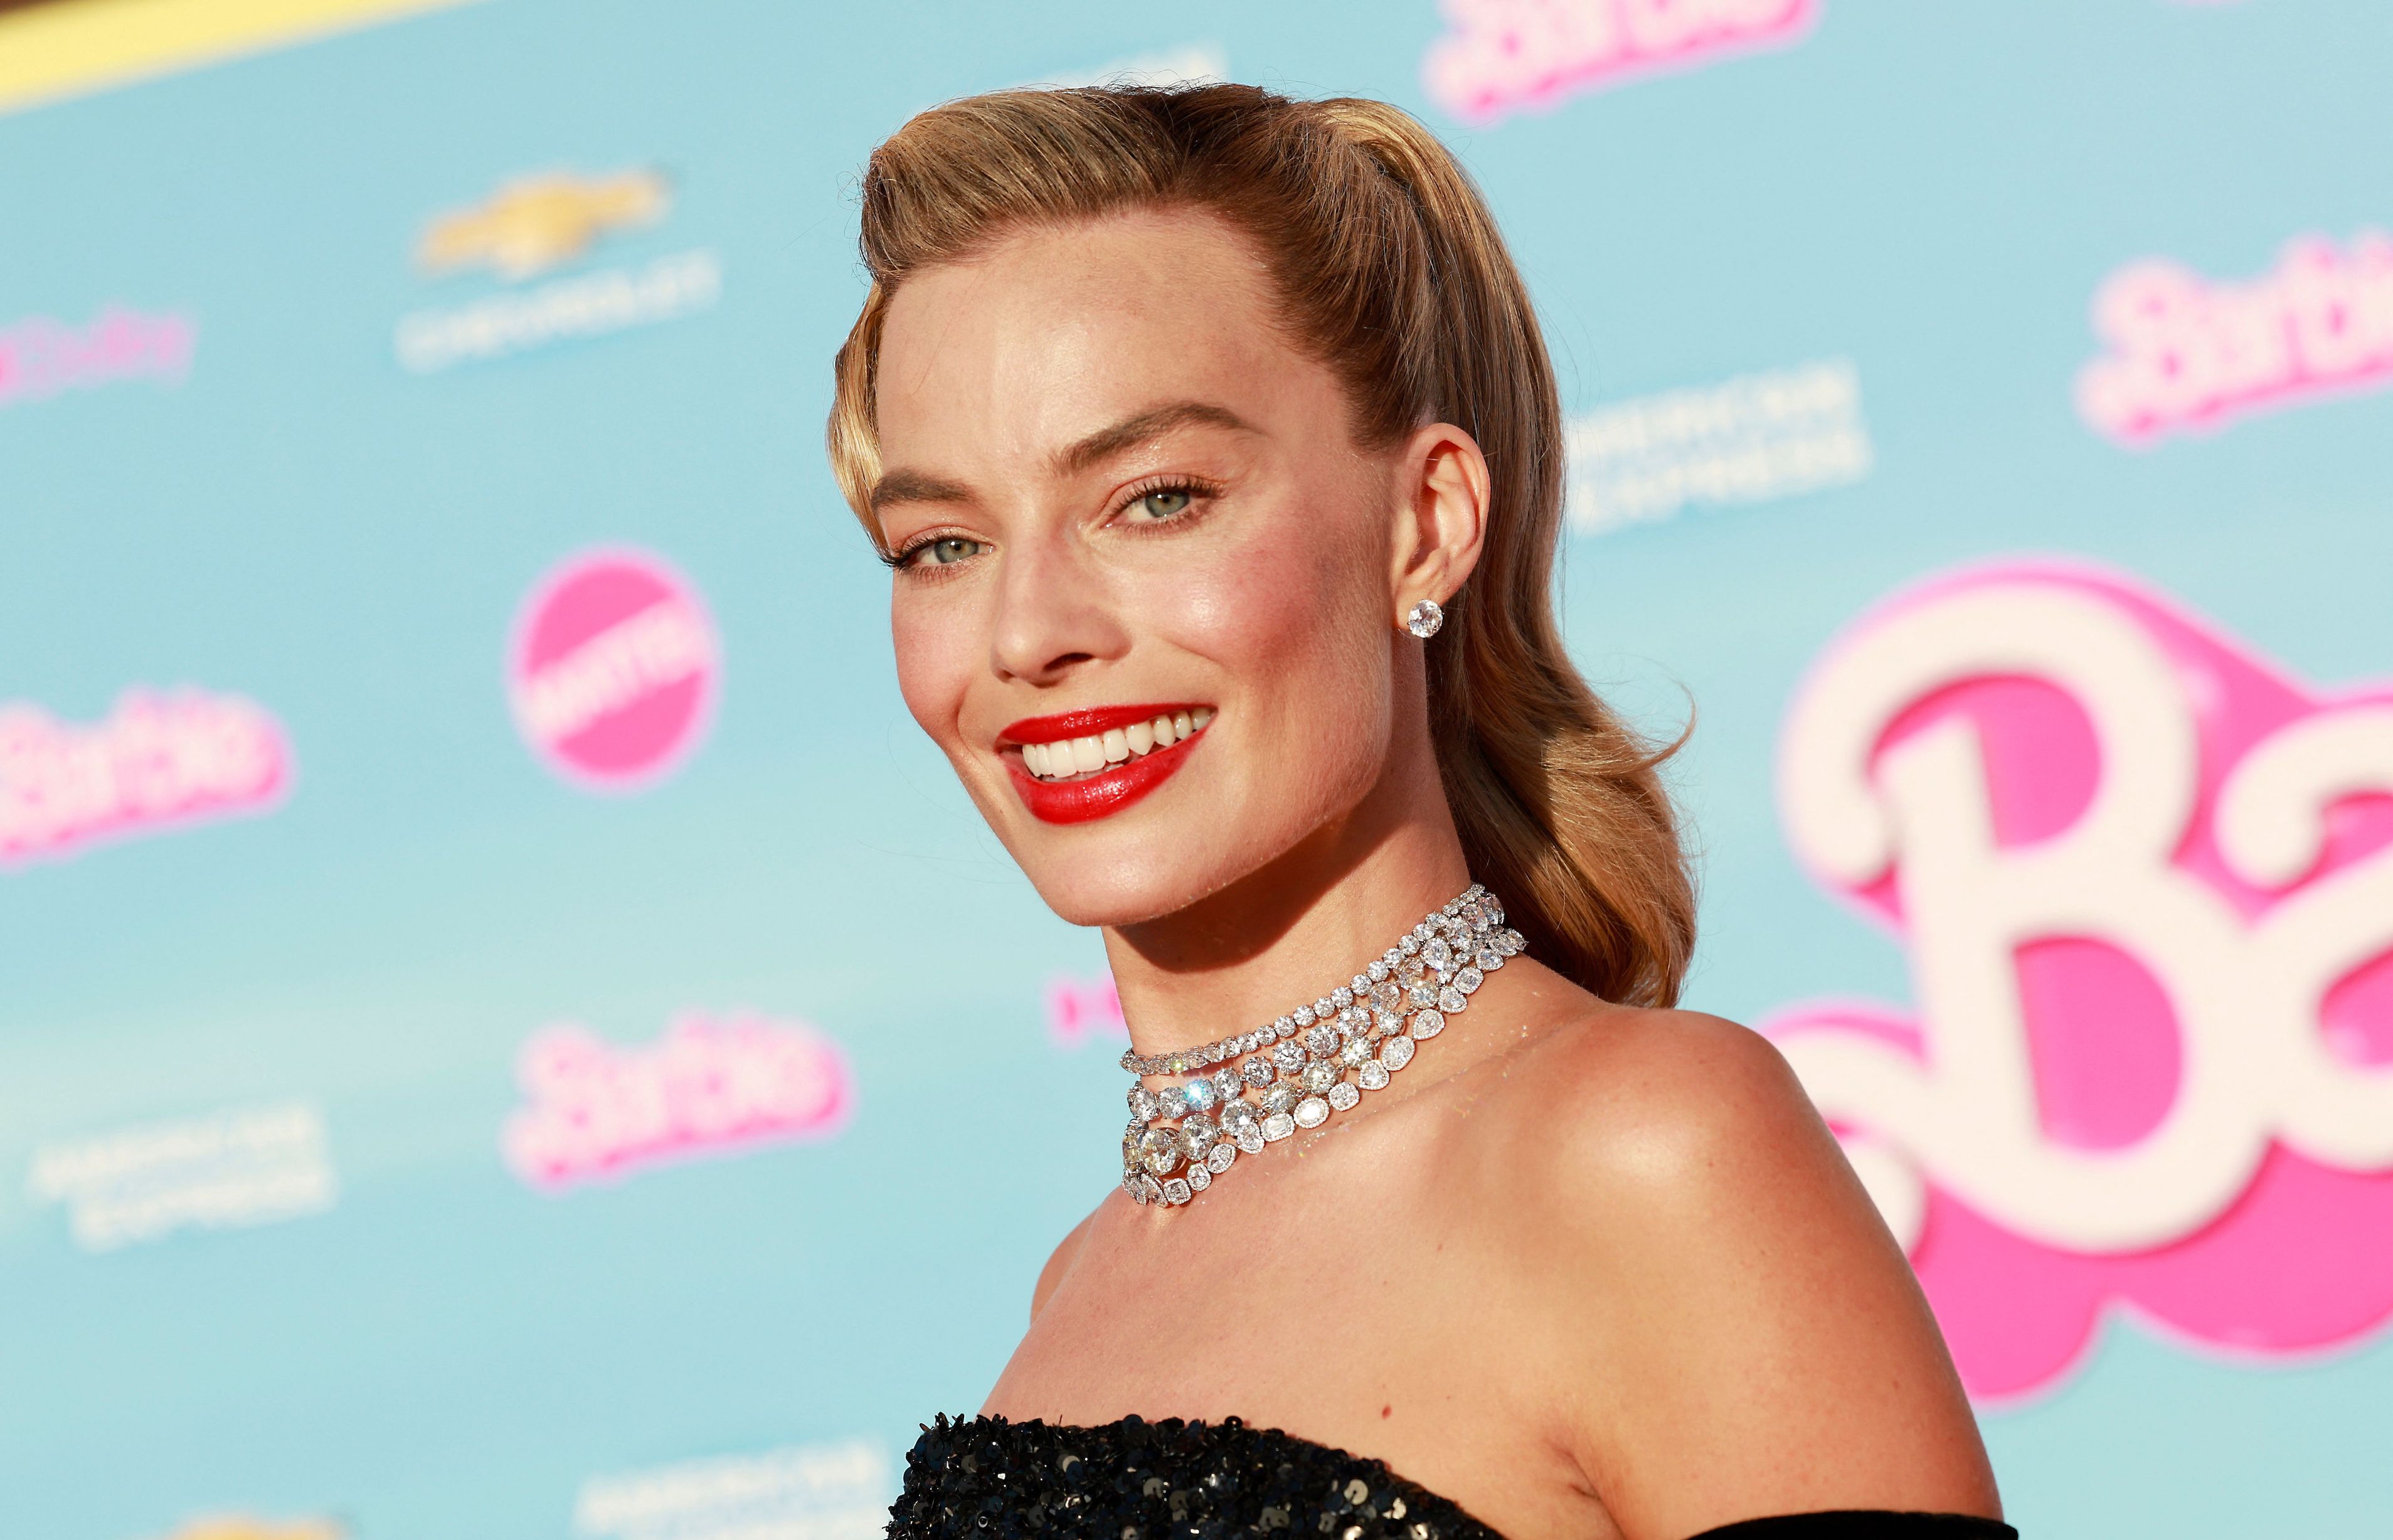 Margot Robbie attends the premiere of Barbie in Los Angeles, California